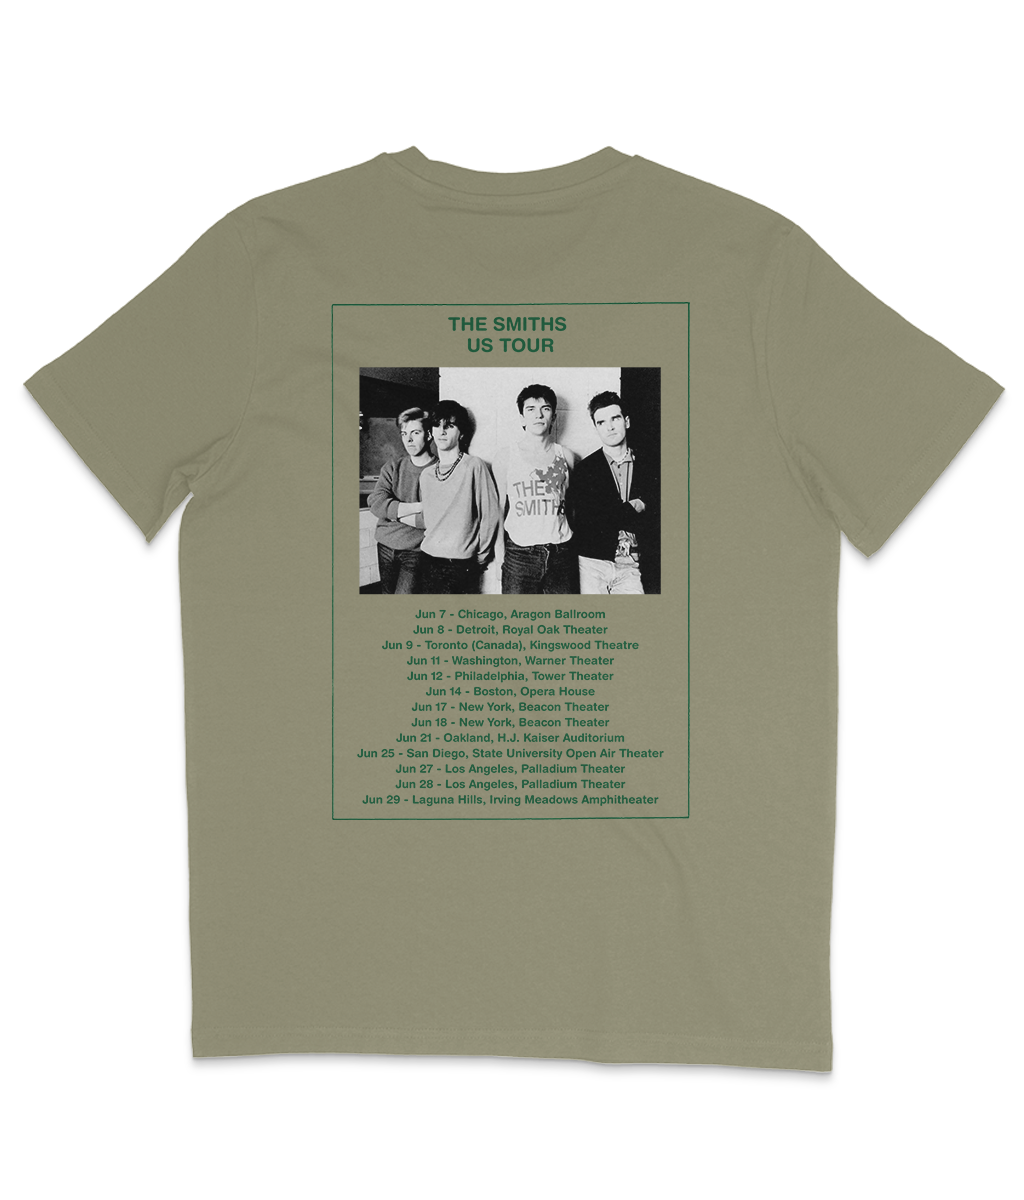 THE SMITHS - Meat Is Murder - 1985 - US Tour - Back Print